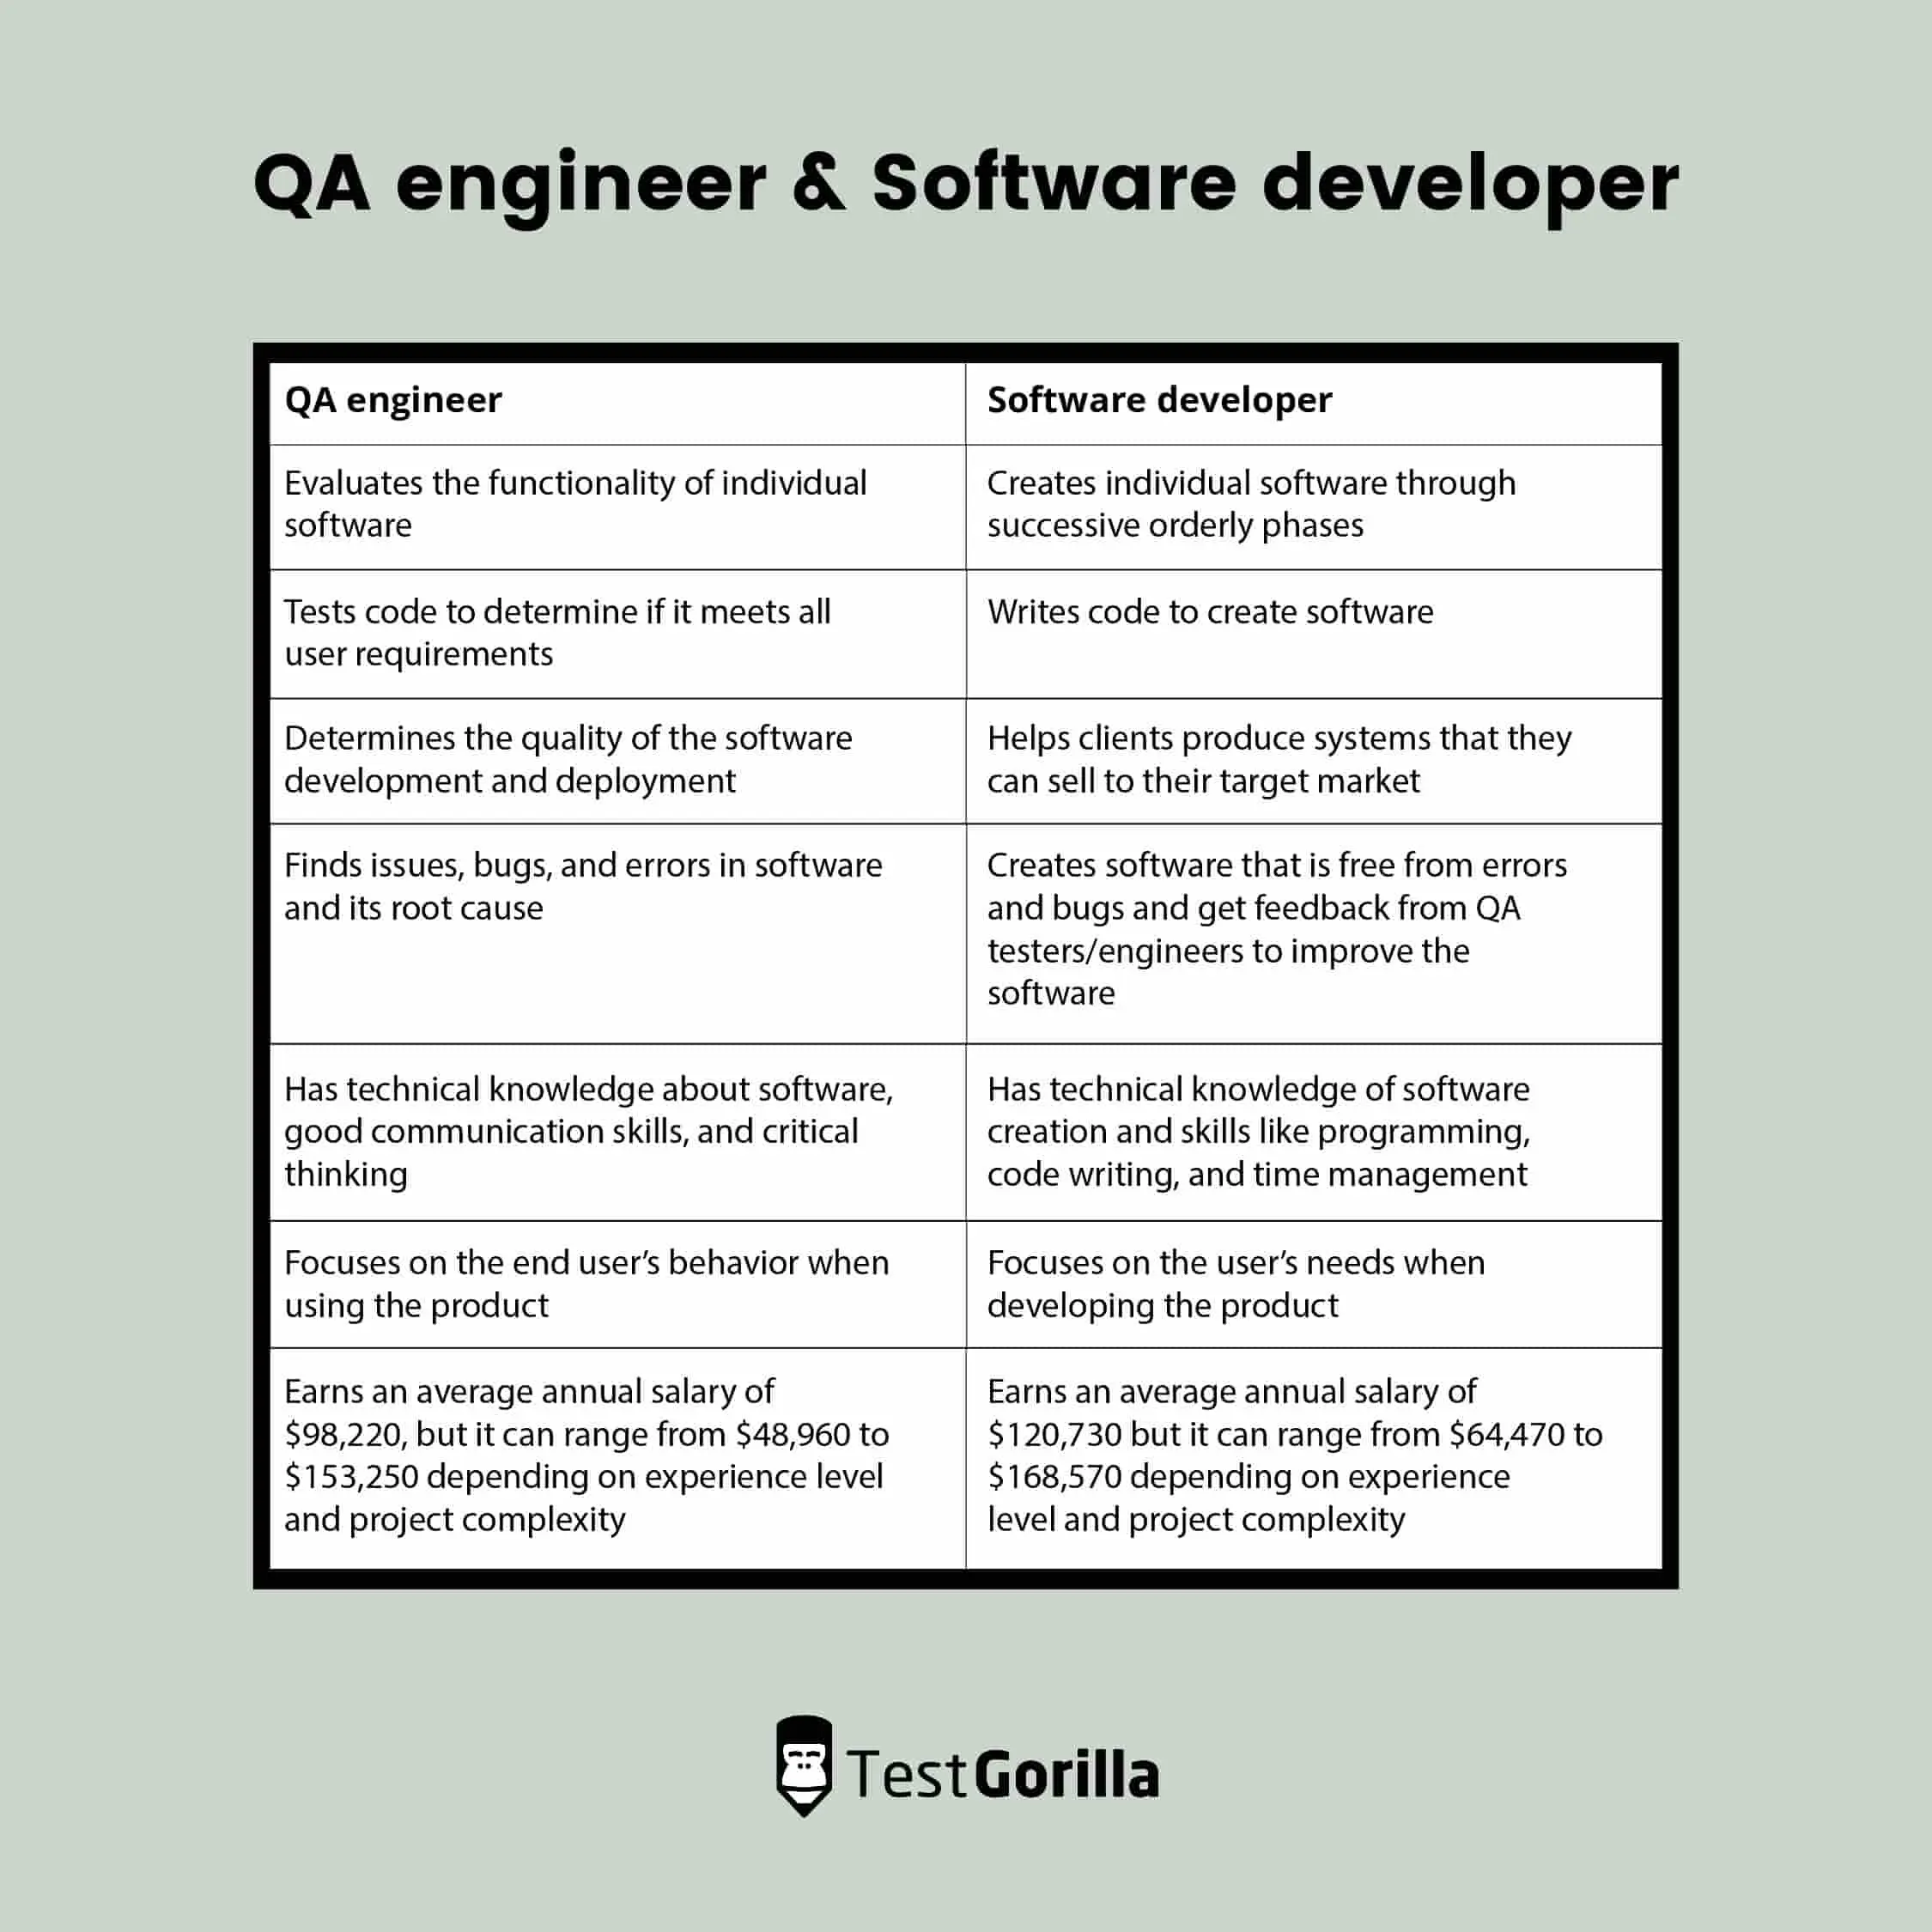 a table comparing the role, responsibilities, and salary range of software developer and qa engineer